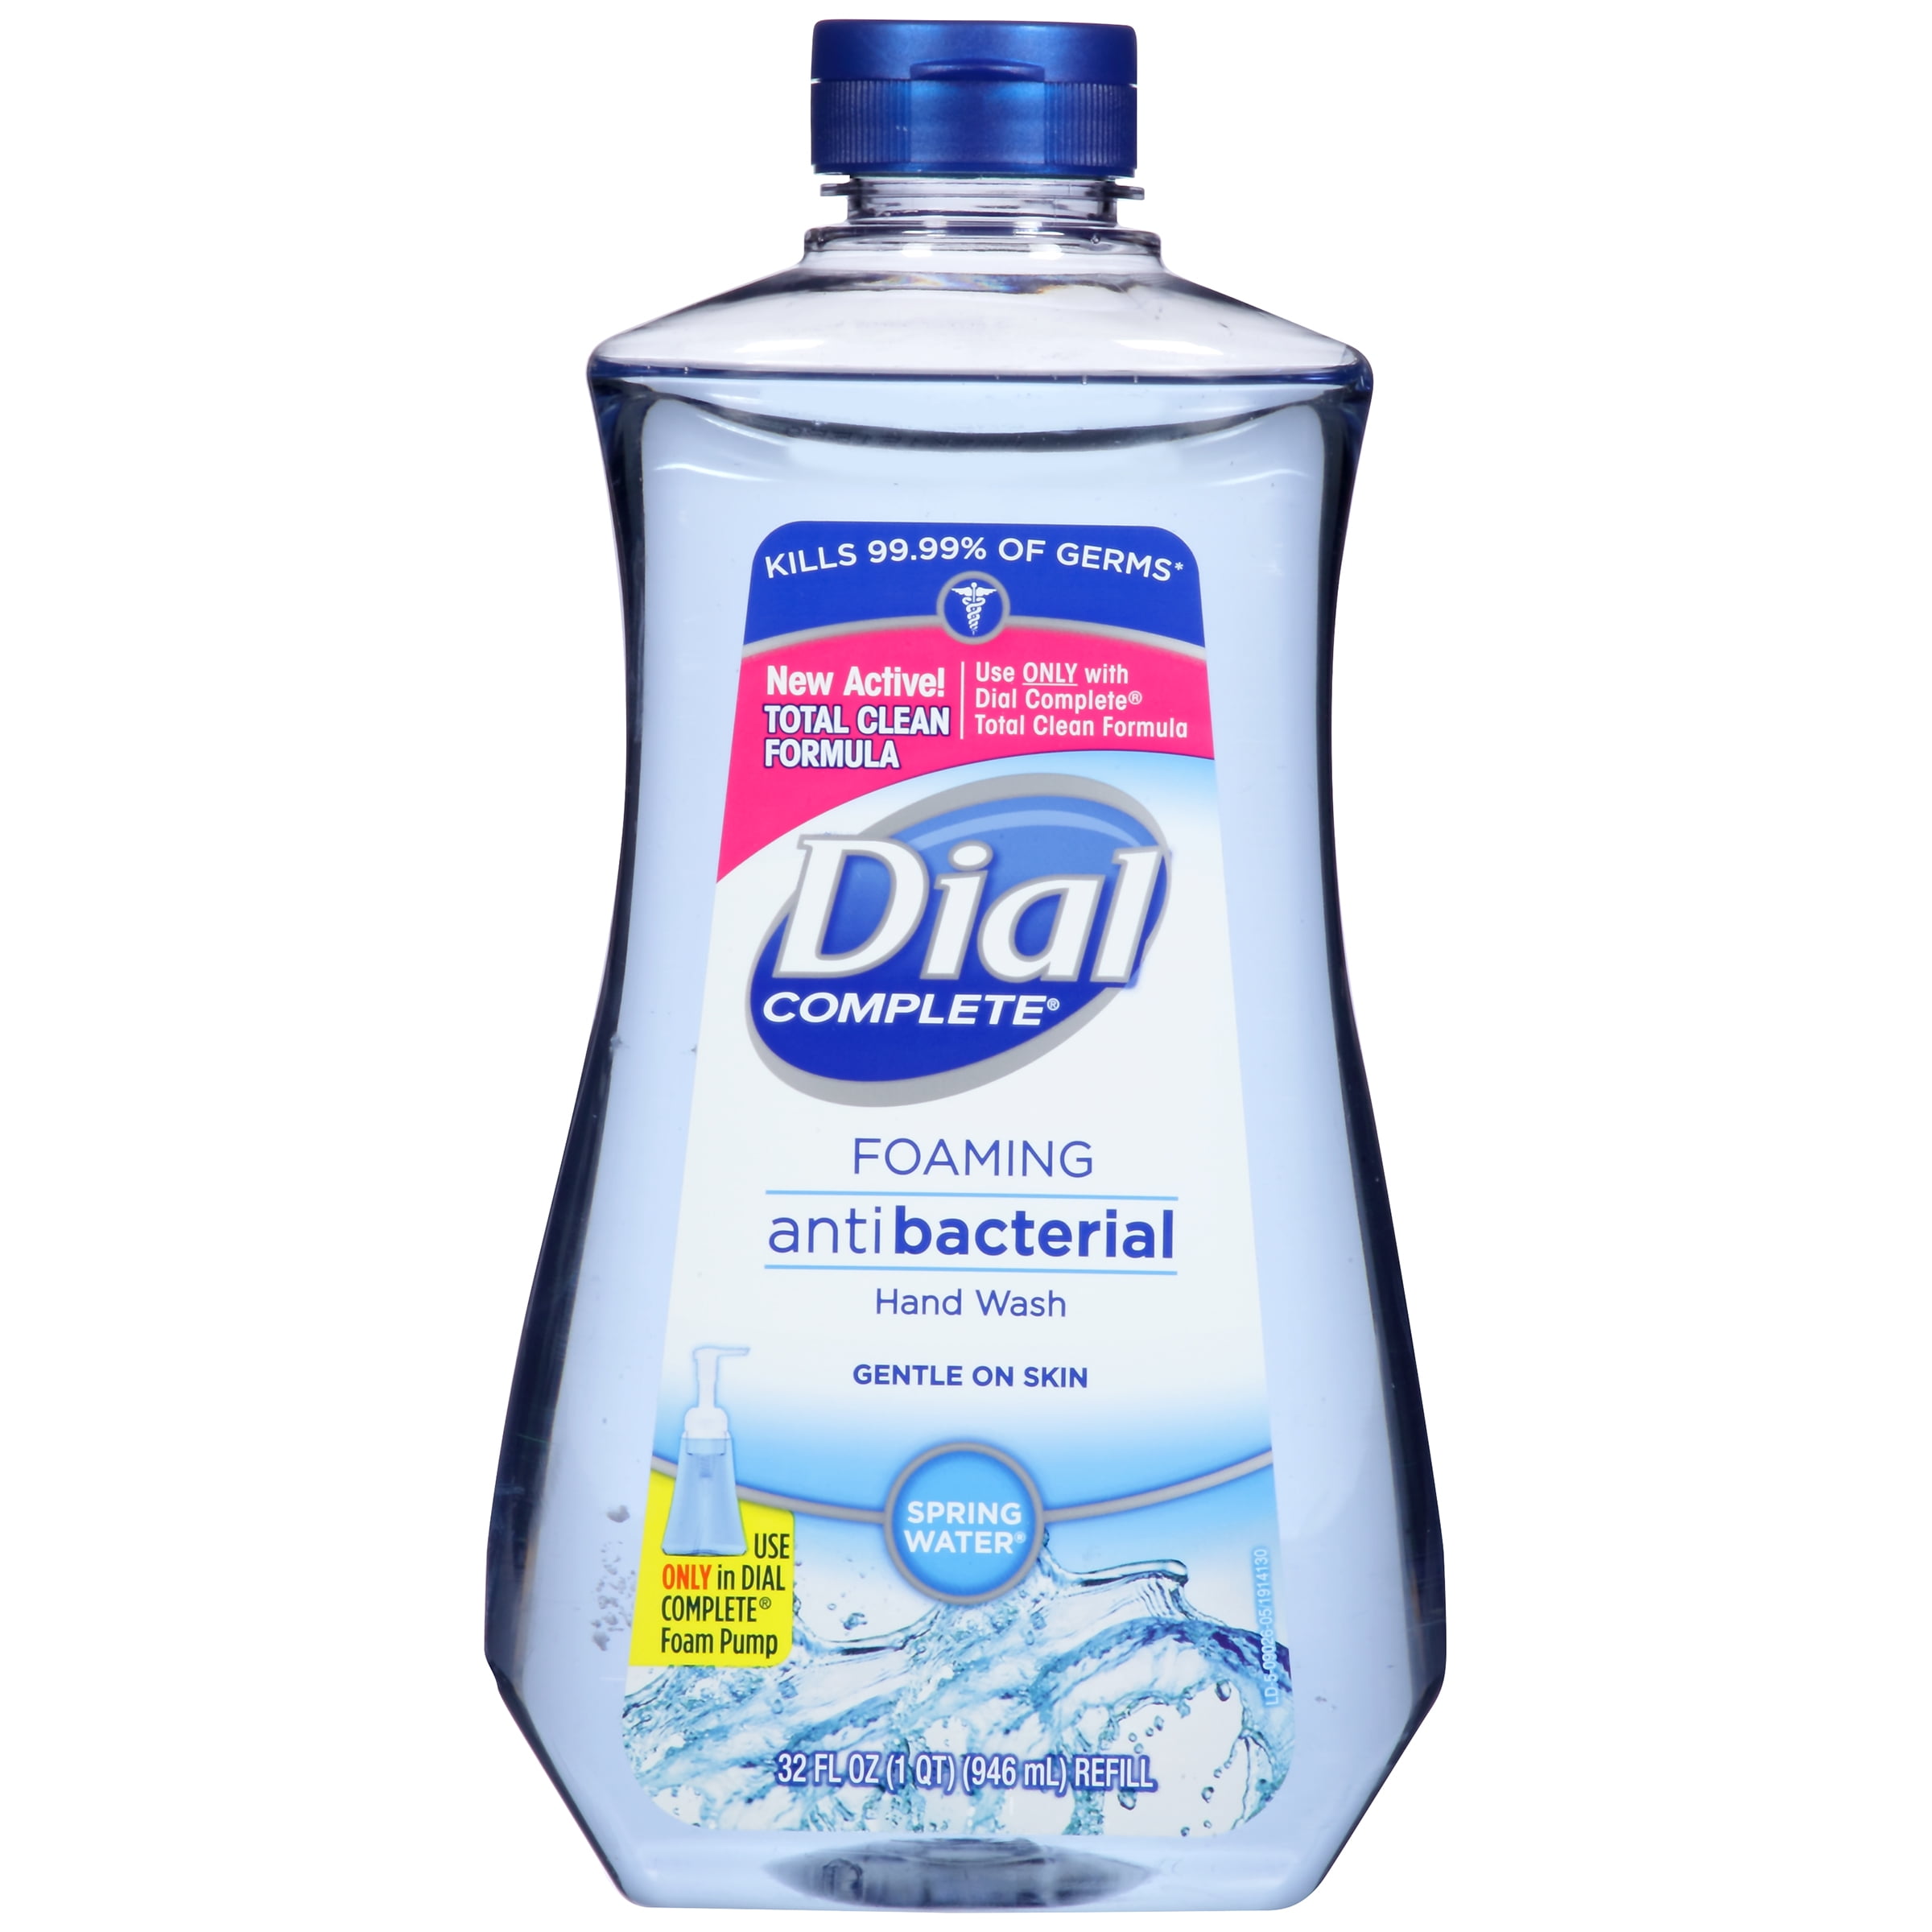 Dial Complete Antibacterial Foaming Hand Wash Refill, Spring Water, 32